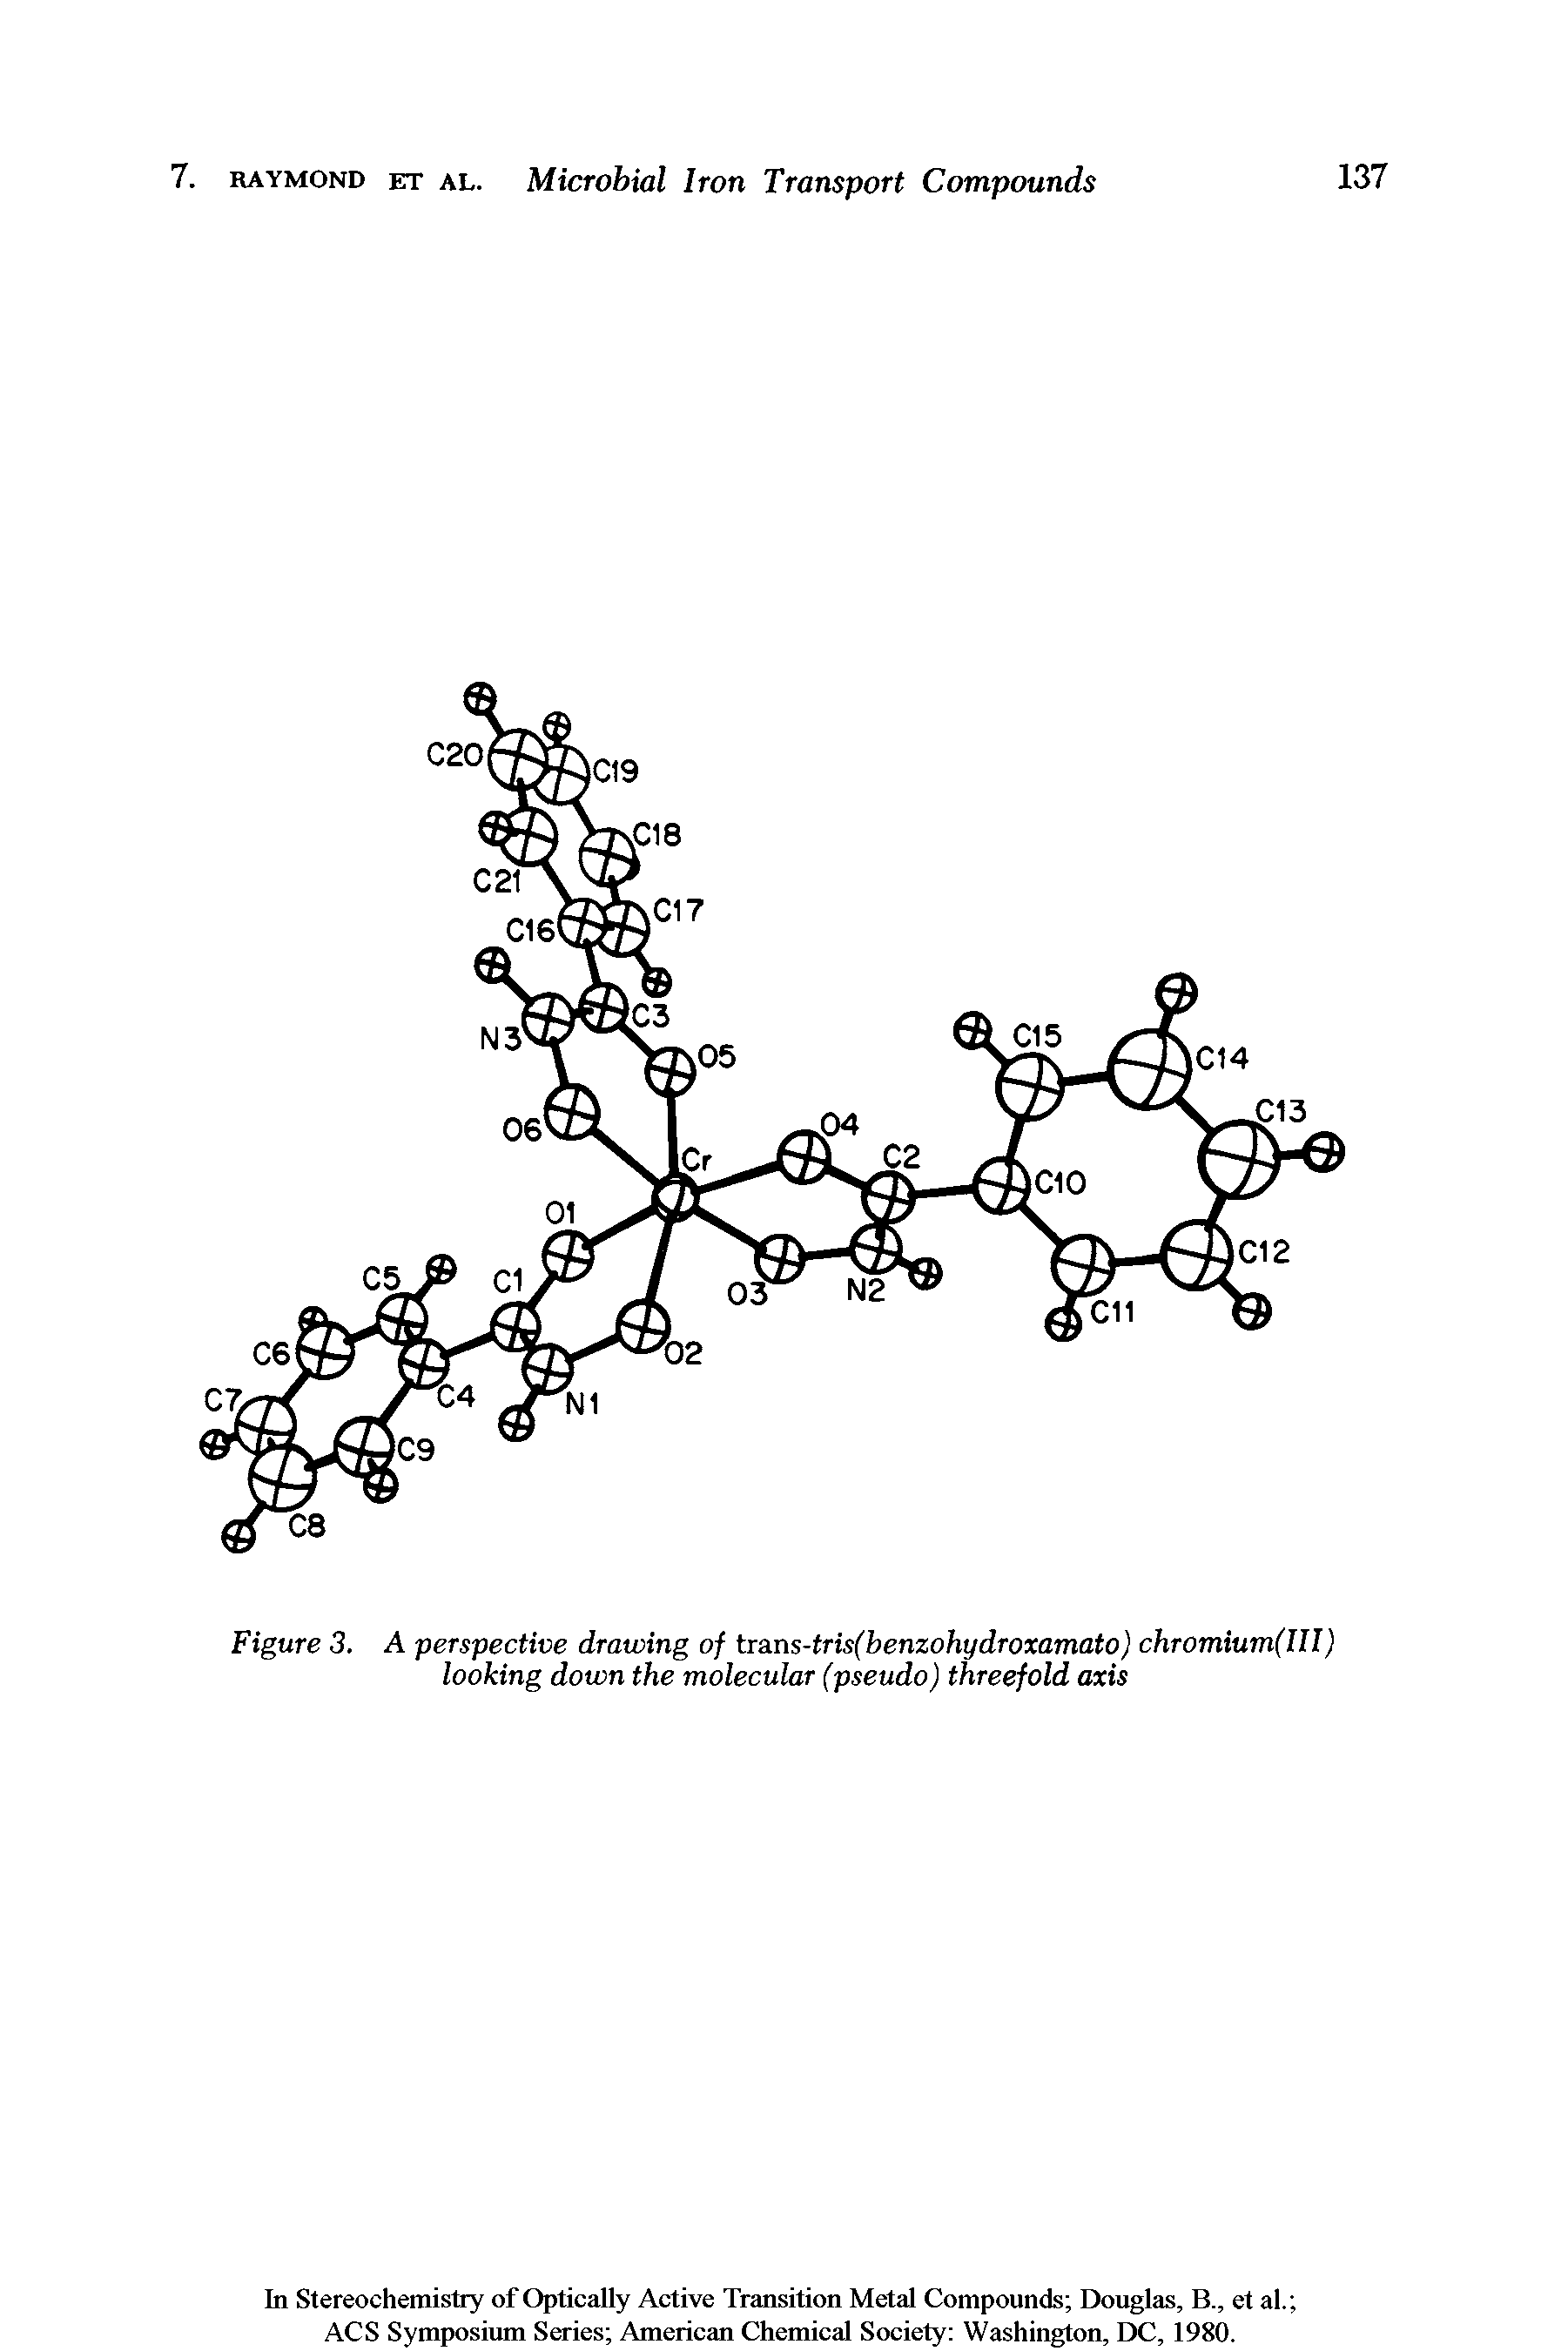 Figure 3. A perspective drawing of trans-tris(benzohydroxamato) chromium(III) looking down the molecular (pseudo) threefold axis...